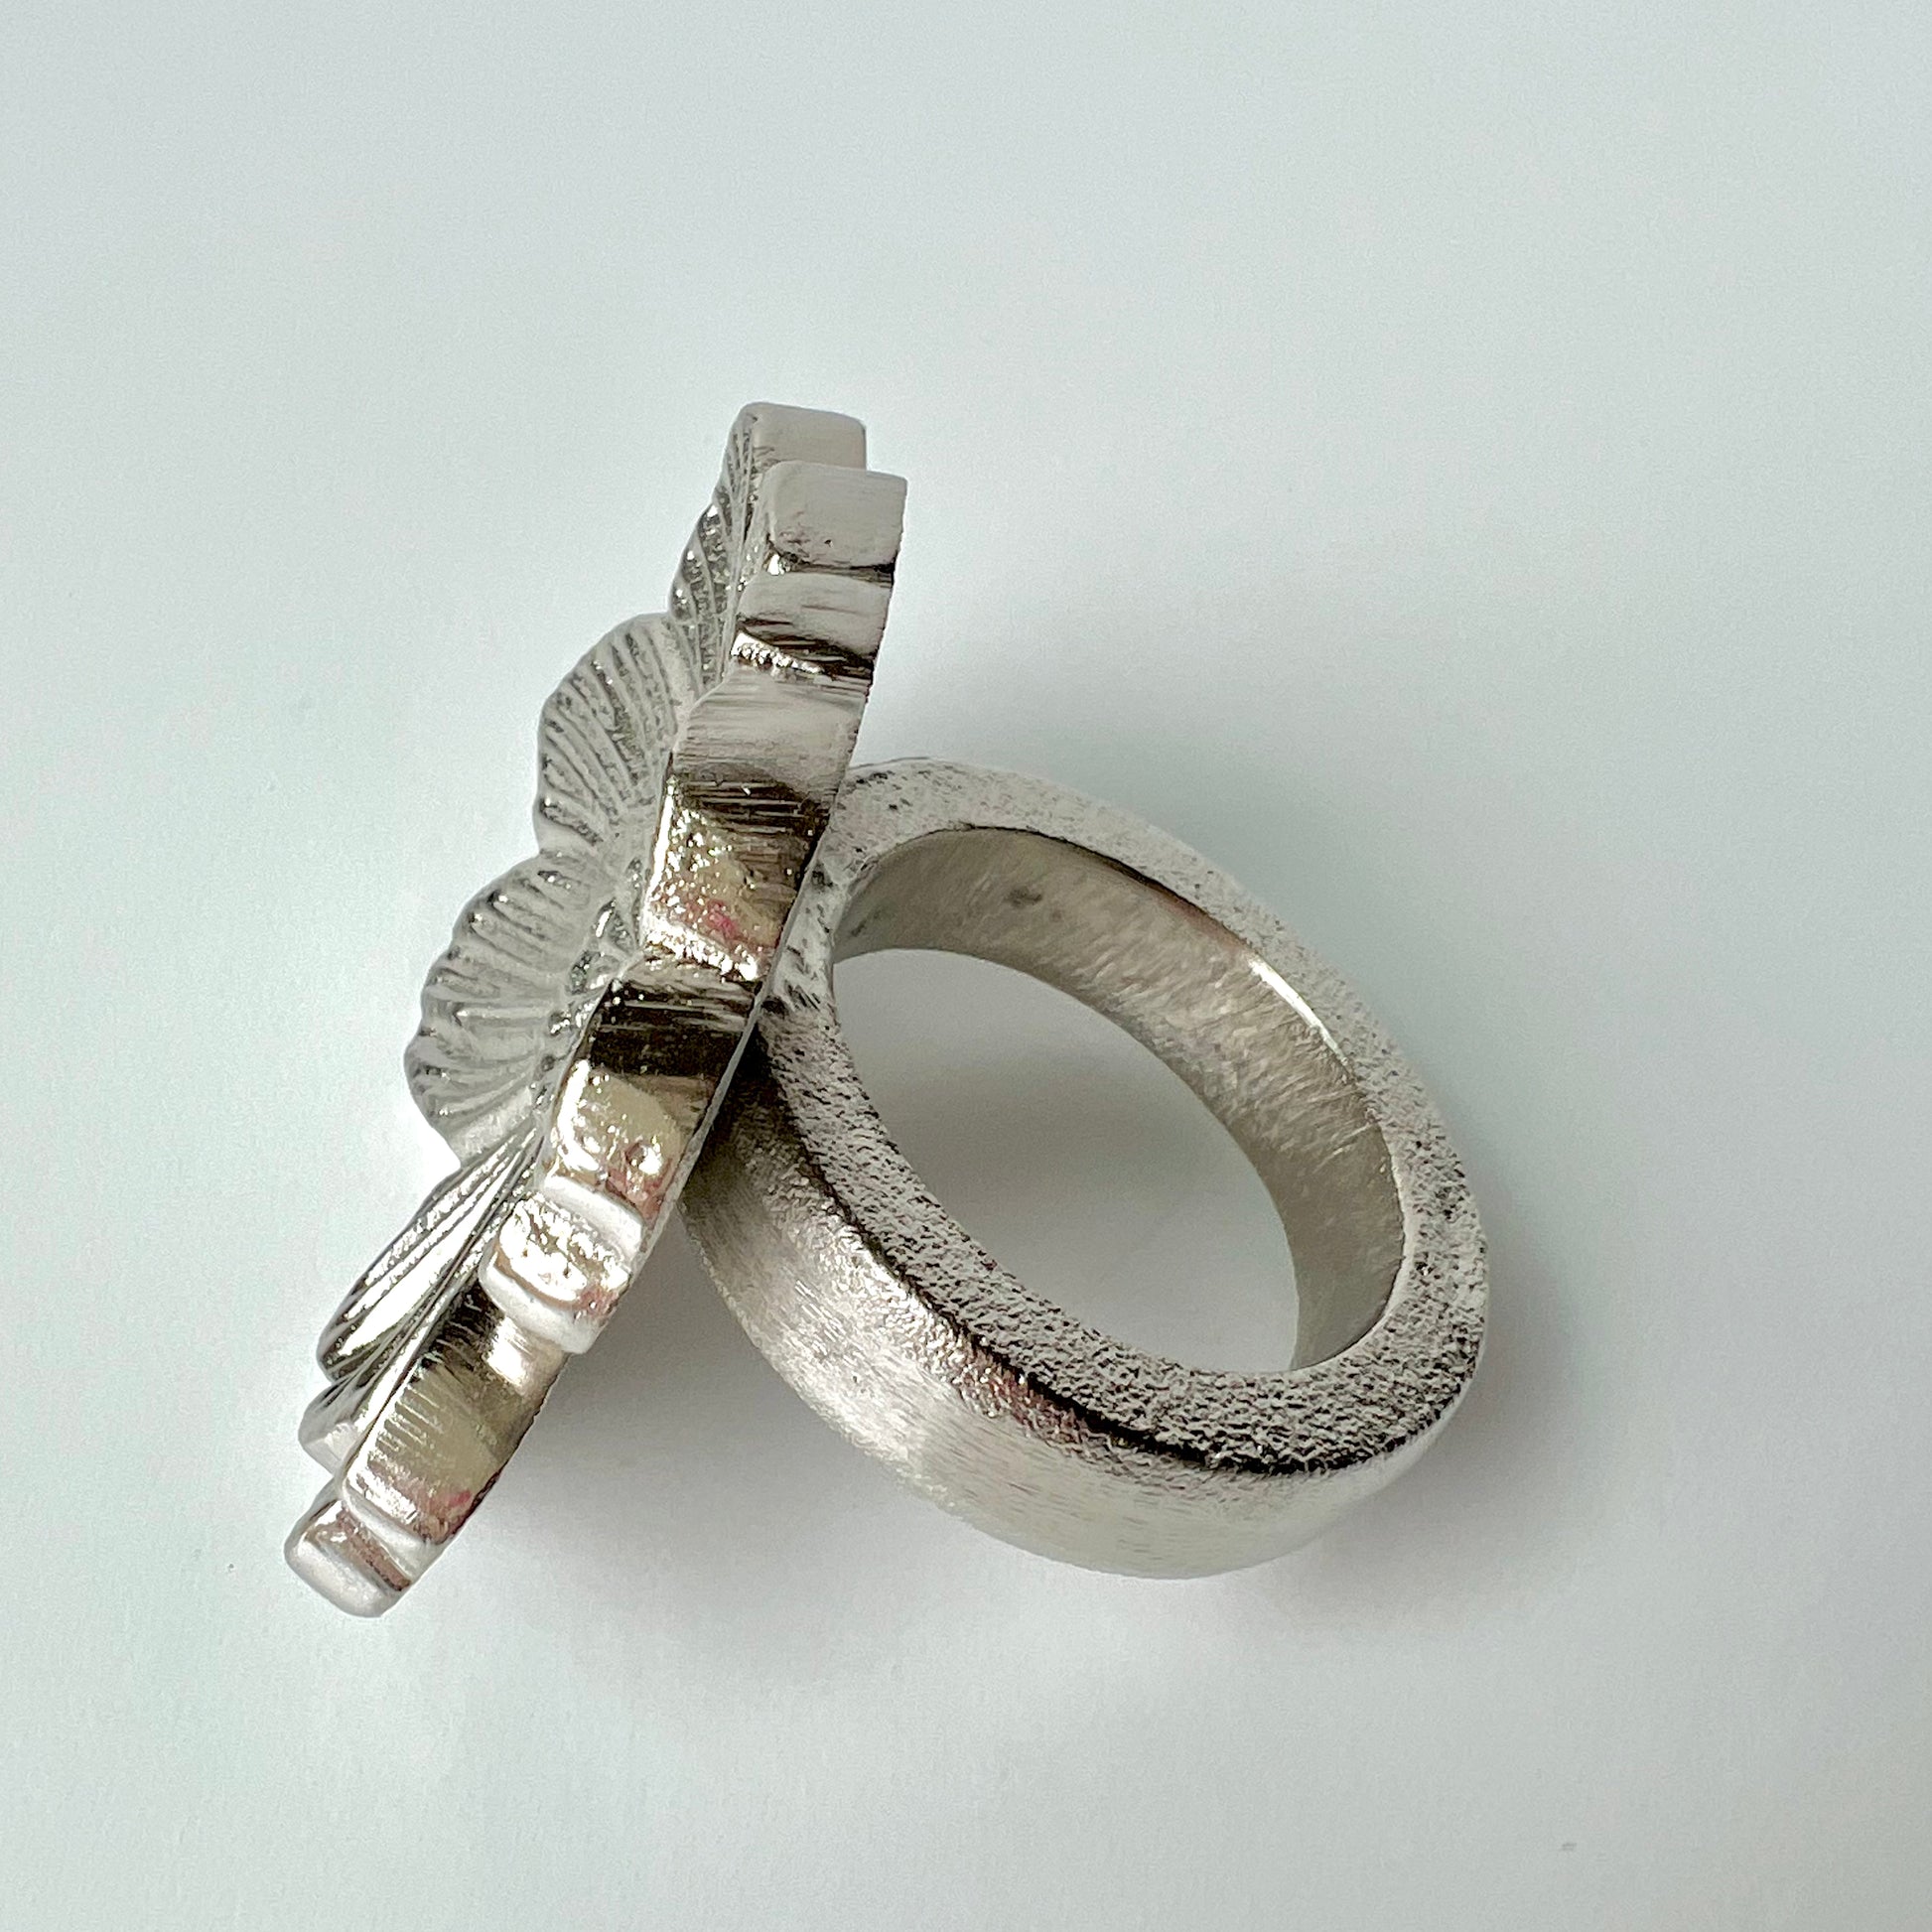 A single silver flower napkin ring shown up close to see its shape and texture